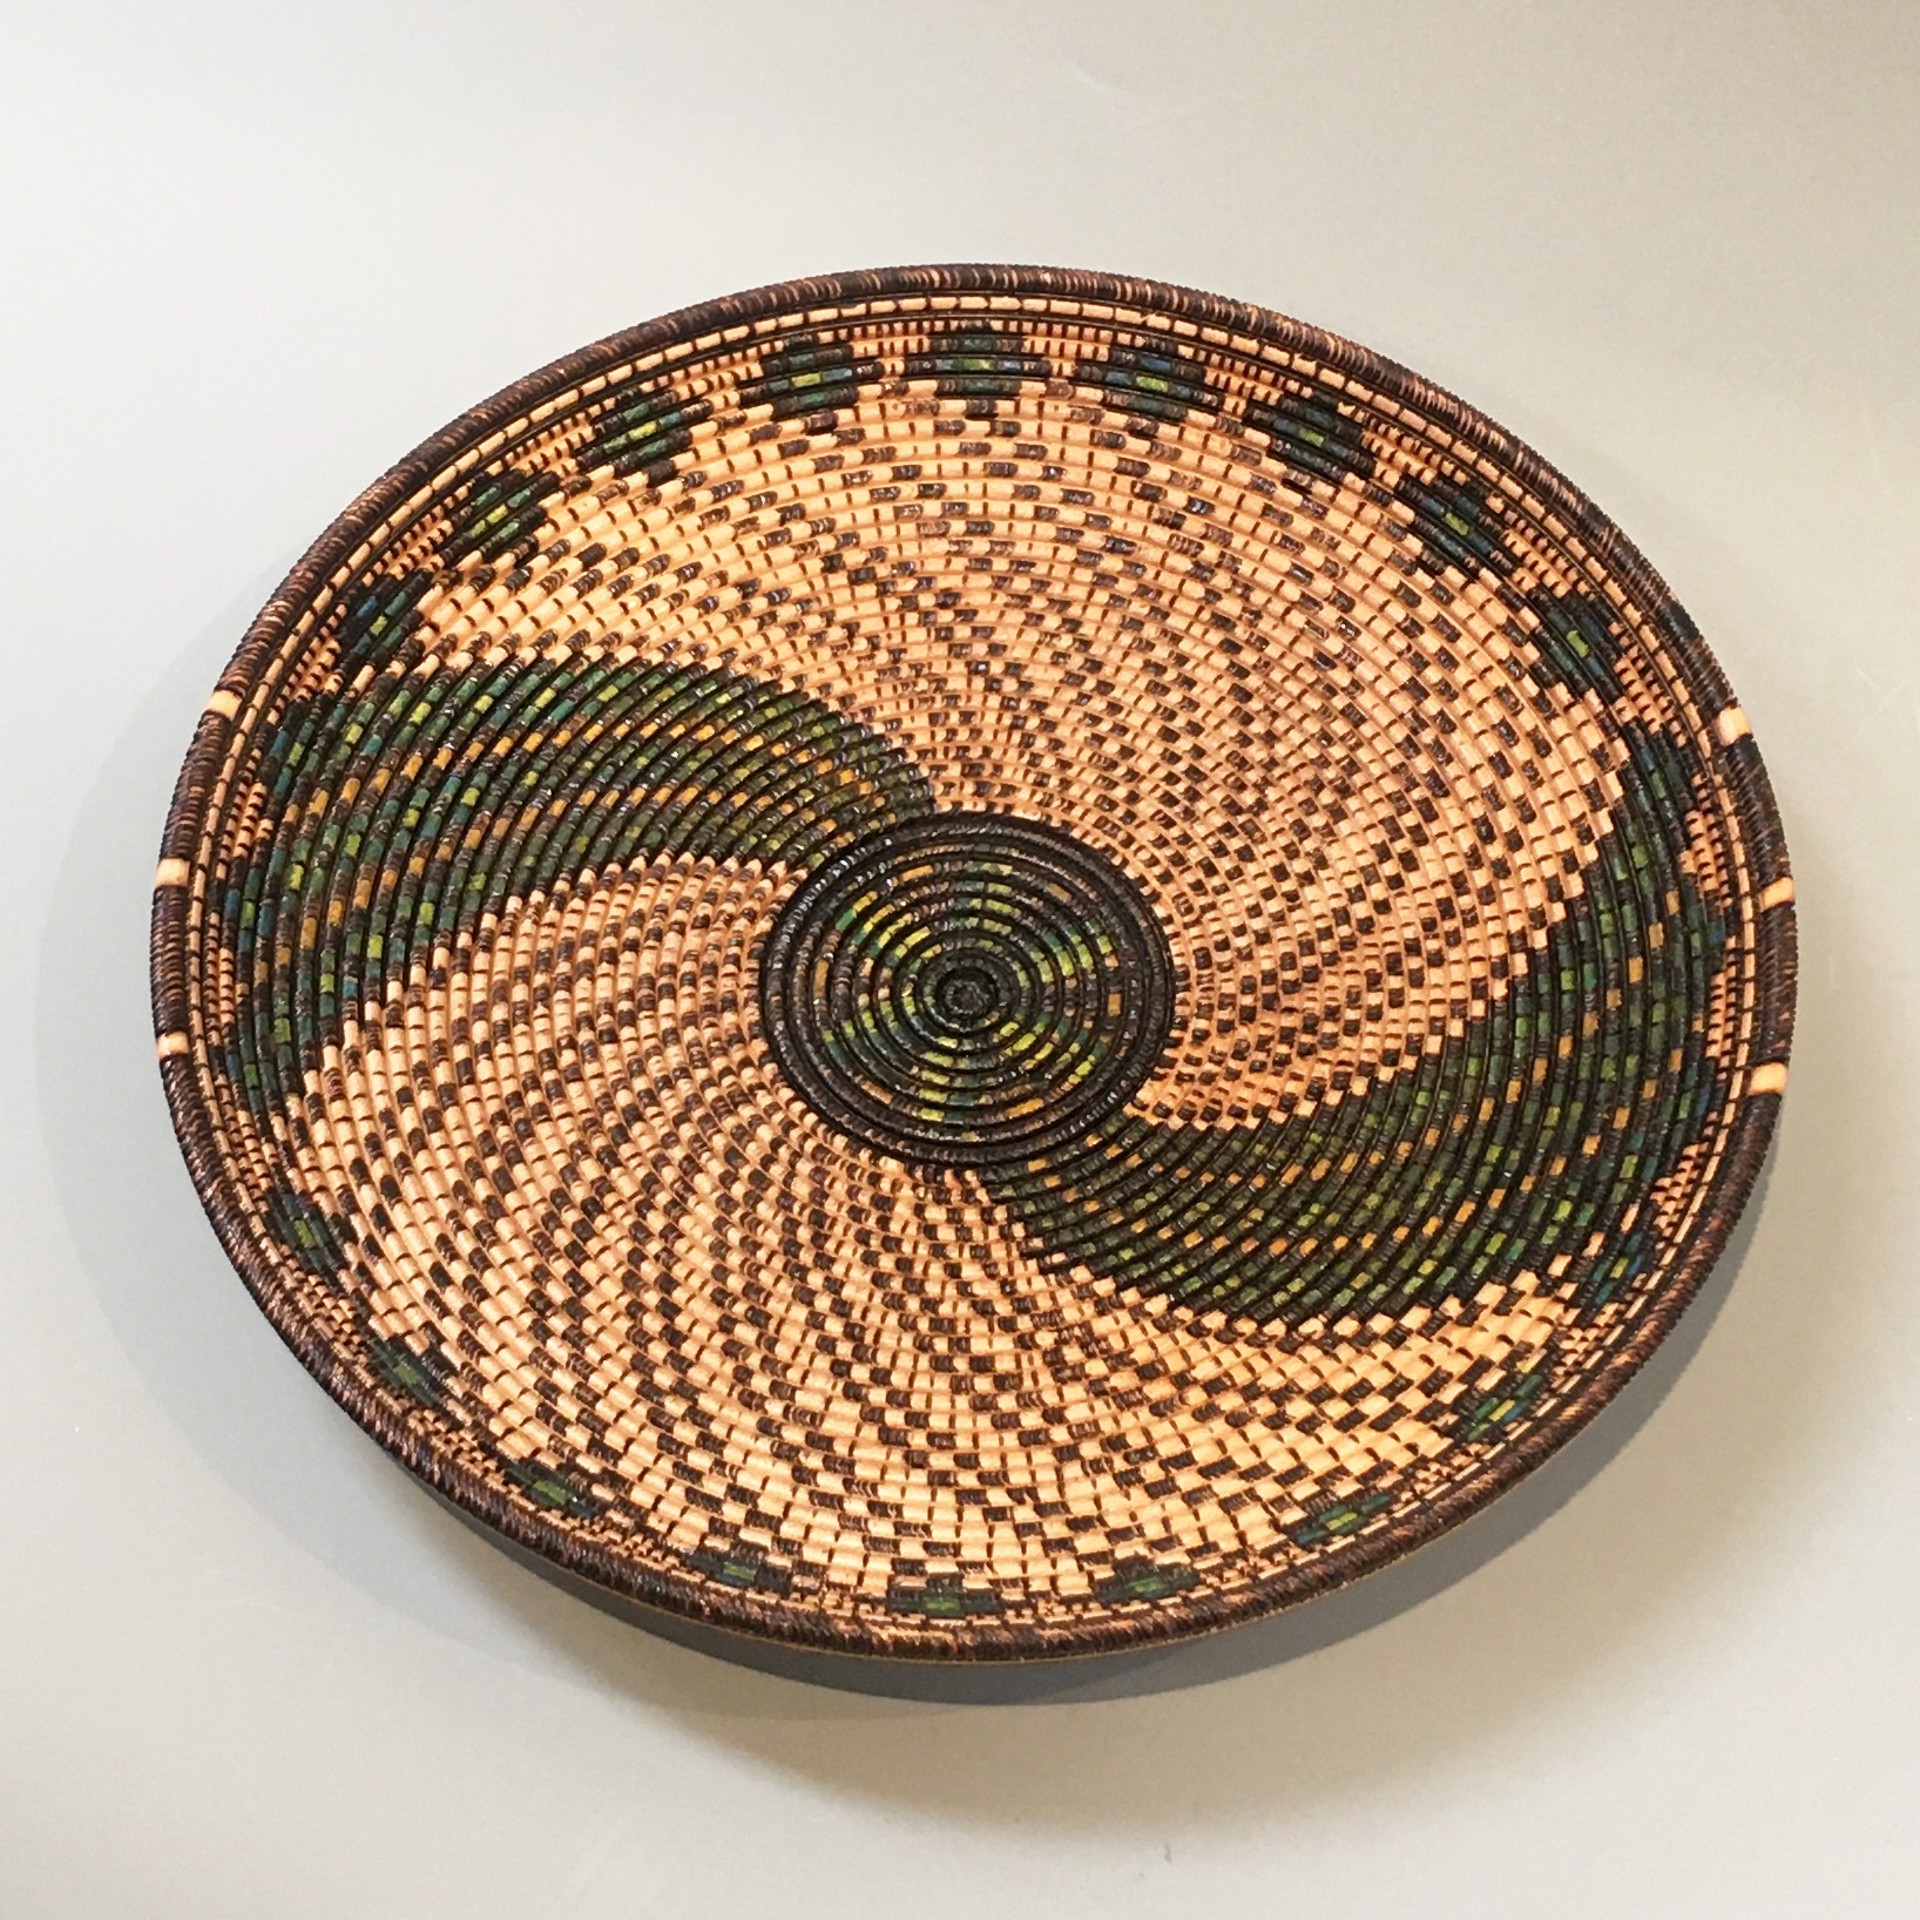 "Orion" Platter by Keoni